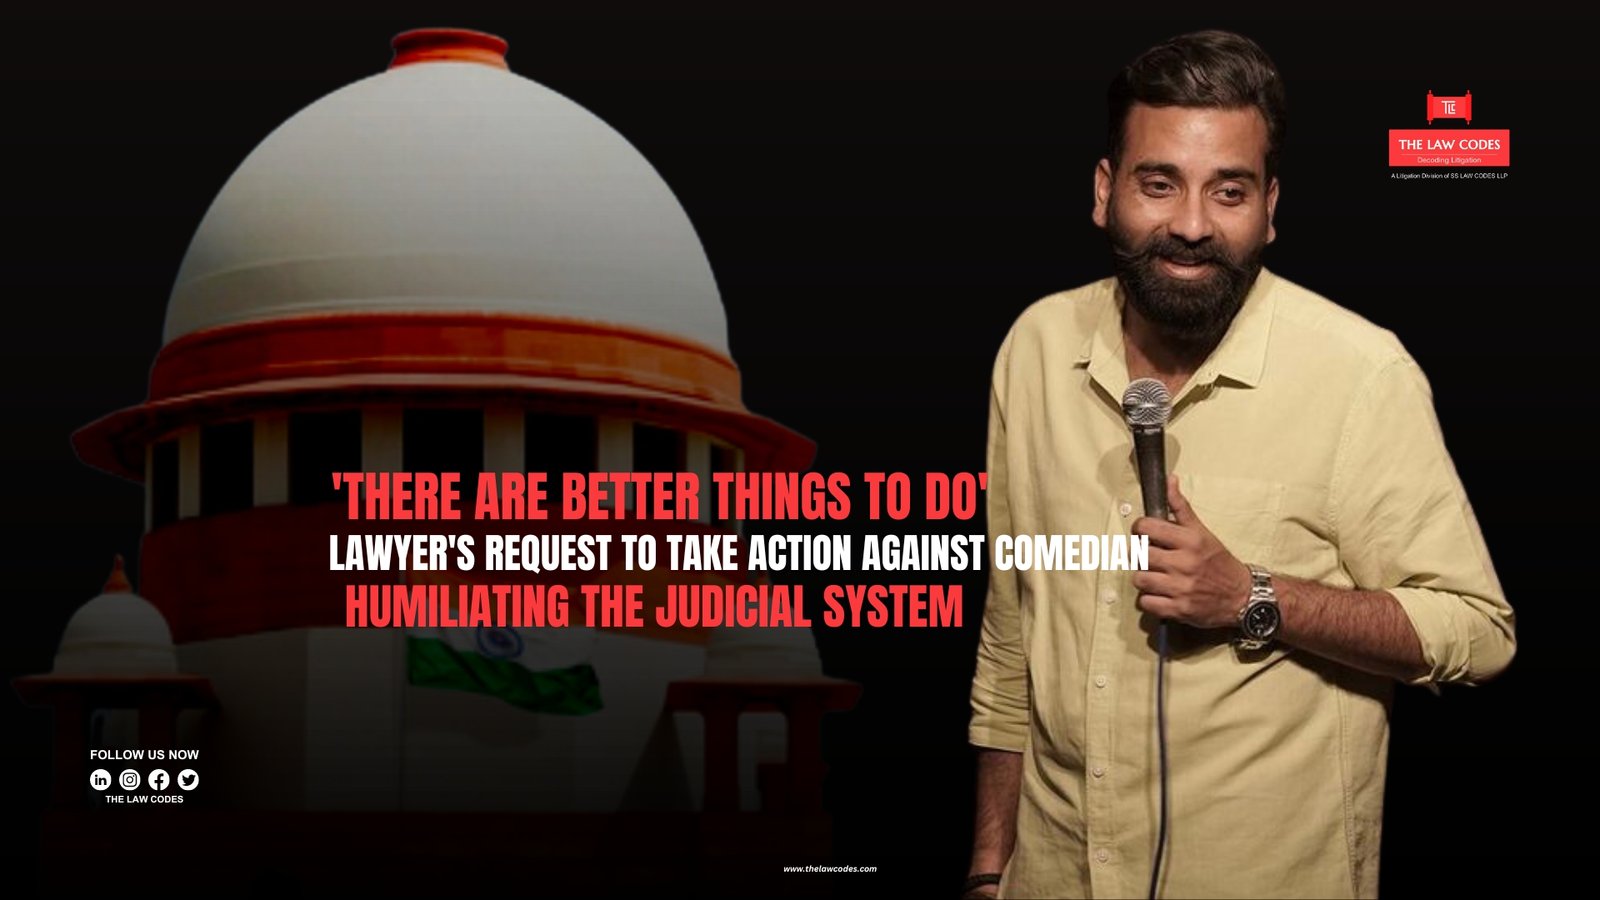 Supreme Court Rejects Lawyer's Request To Take Action Against Comedian For 'Humiliating the Judicial System' because 'There Are Better Things To Do'